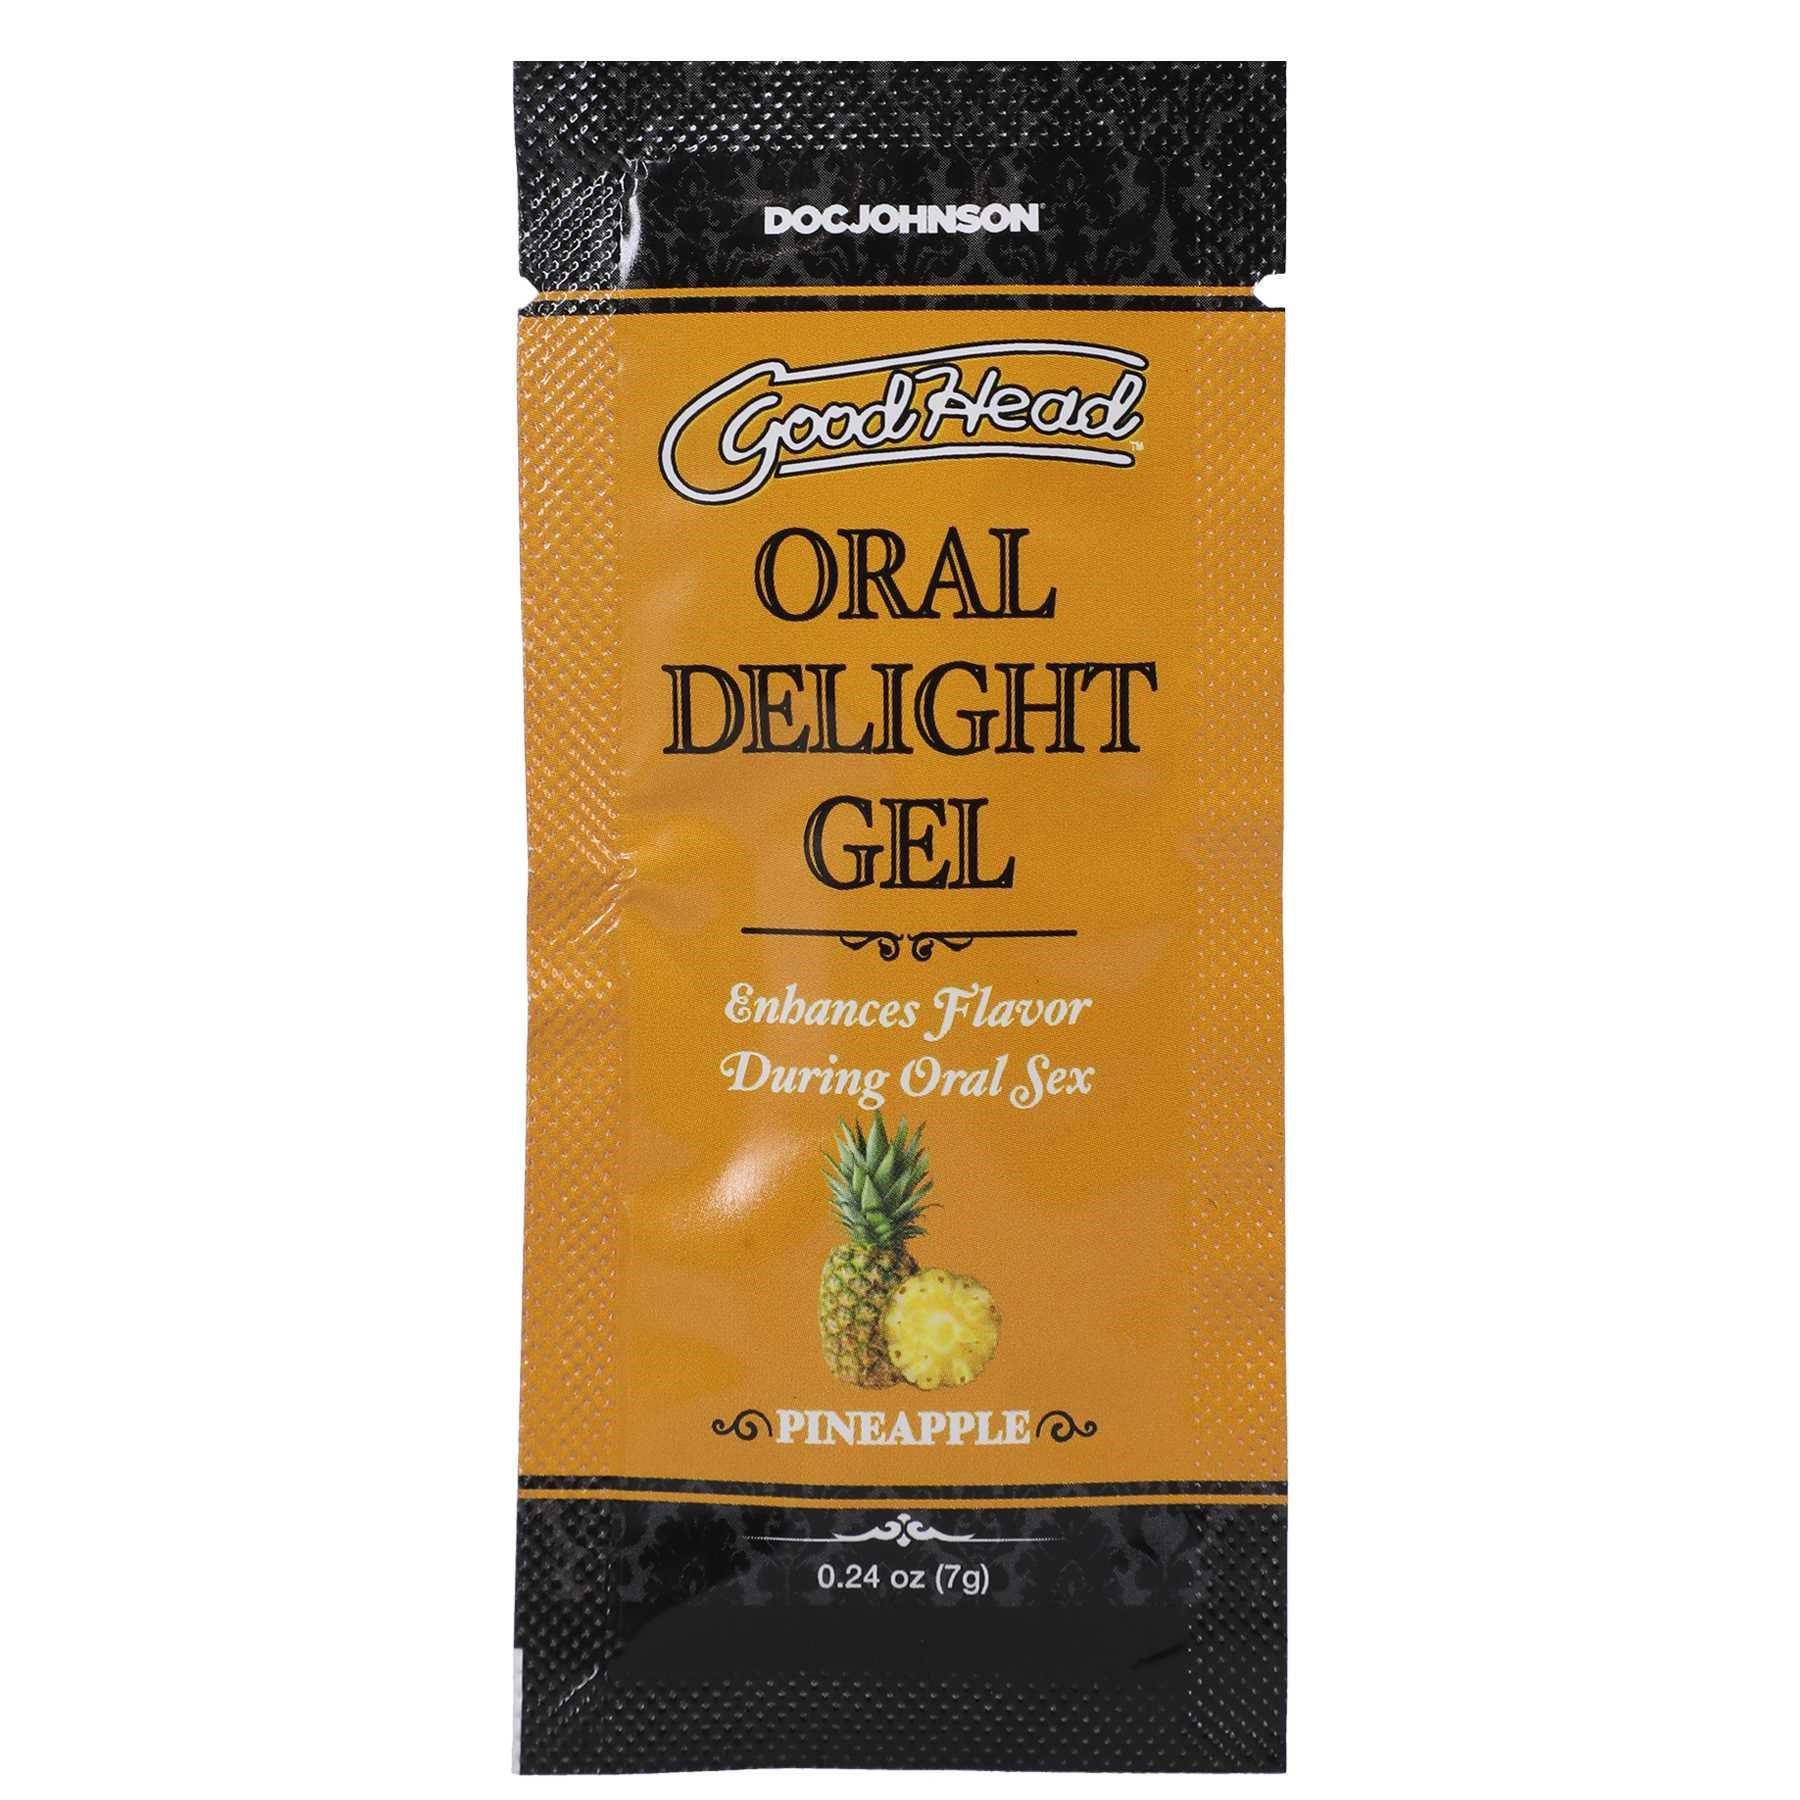 GoodHead - Oral Delight Gel -pineapple -0.24 oz front